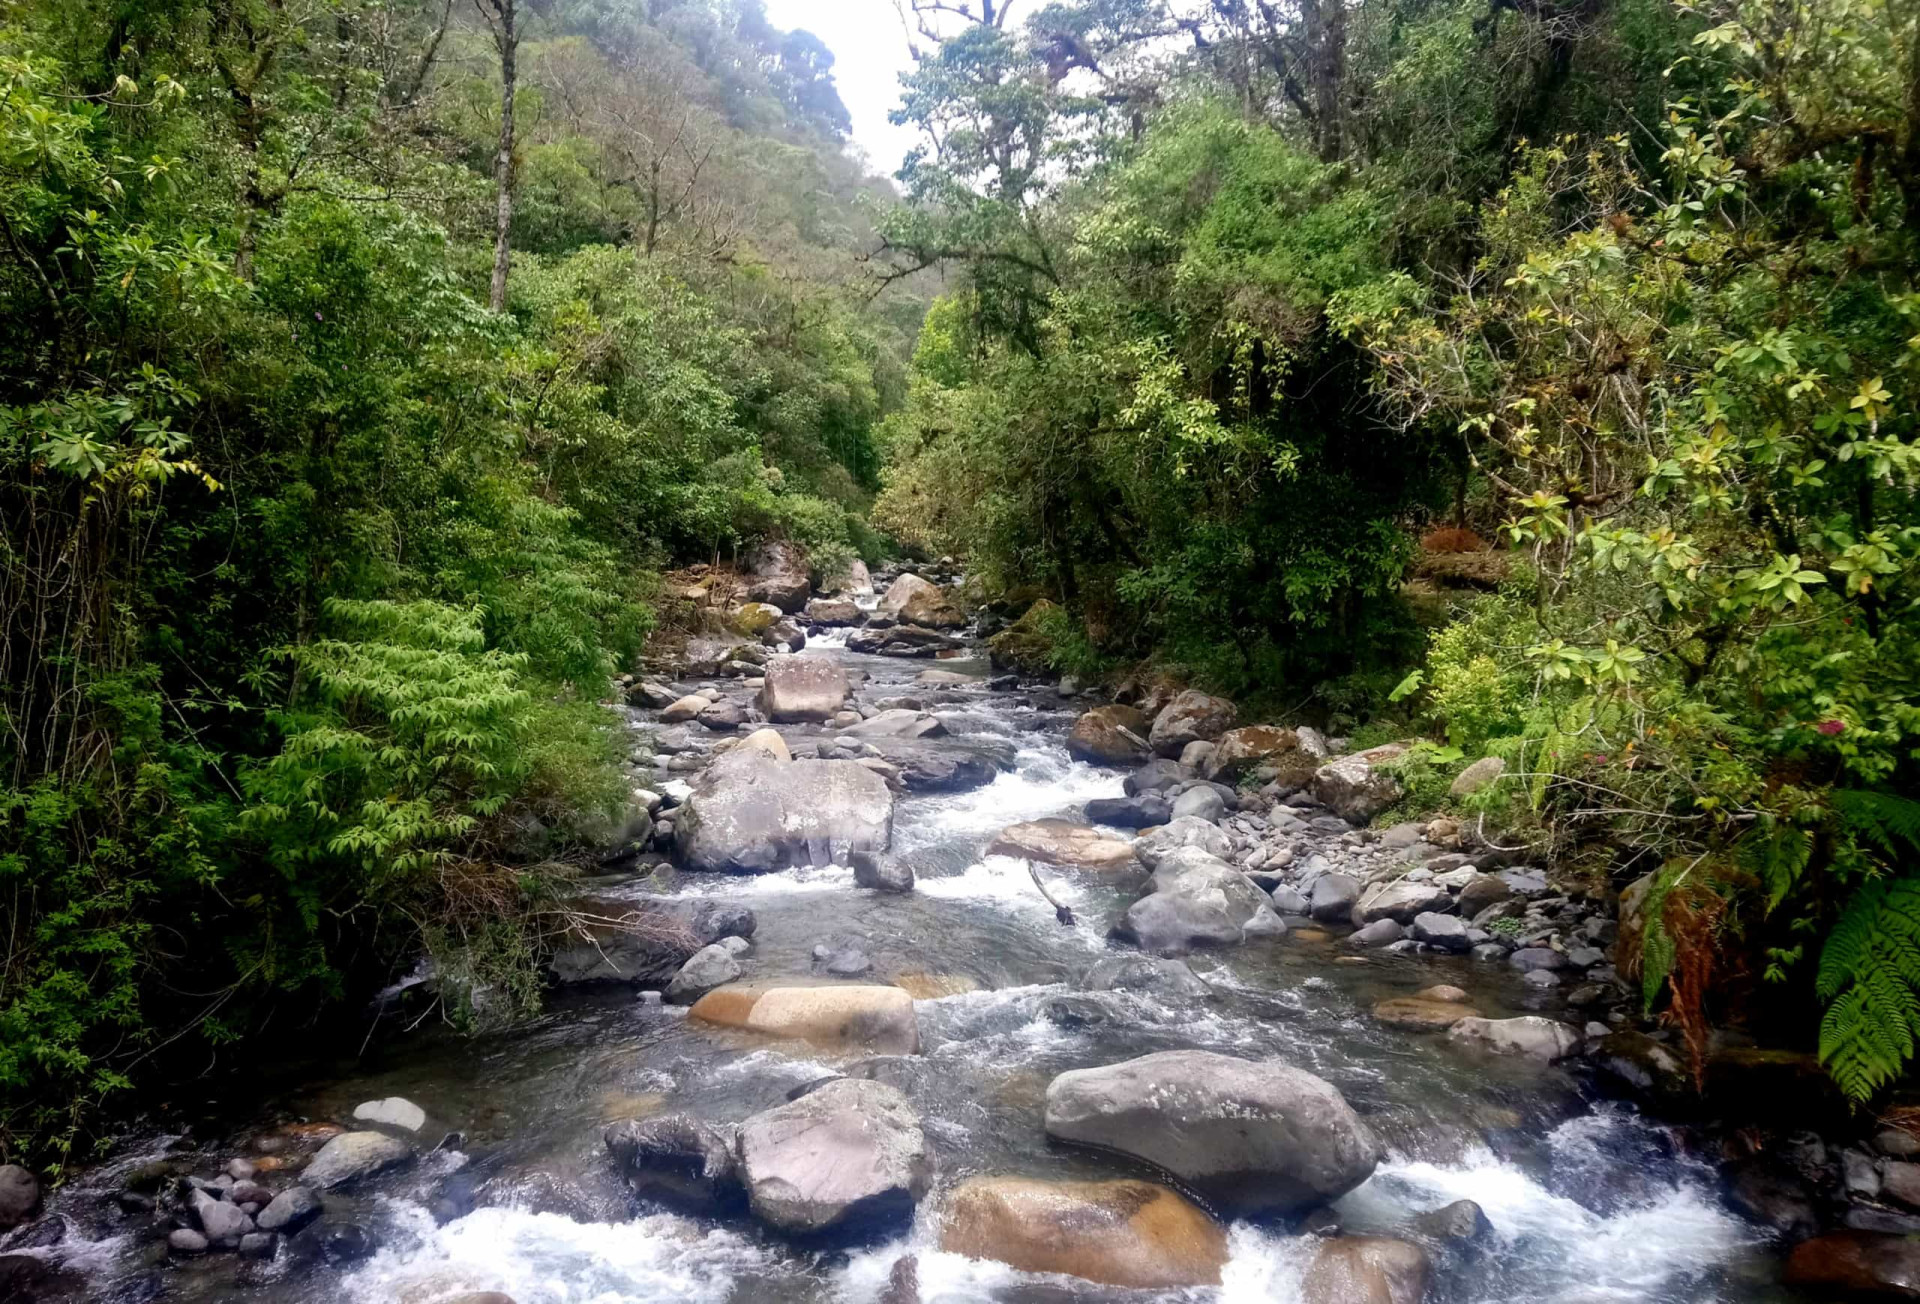 <p>Location: Antioquia and Choco Departments<br>Criteria: Natural<br>Year established: 1994<br>Description: Embedded in the Darién Gap, the break across the South American and North American continents, the park encompasses an extraordinary diversity of plant and animal species (it contains over 25% of the bird species reported for Colombia).</p>